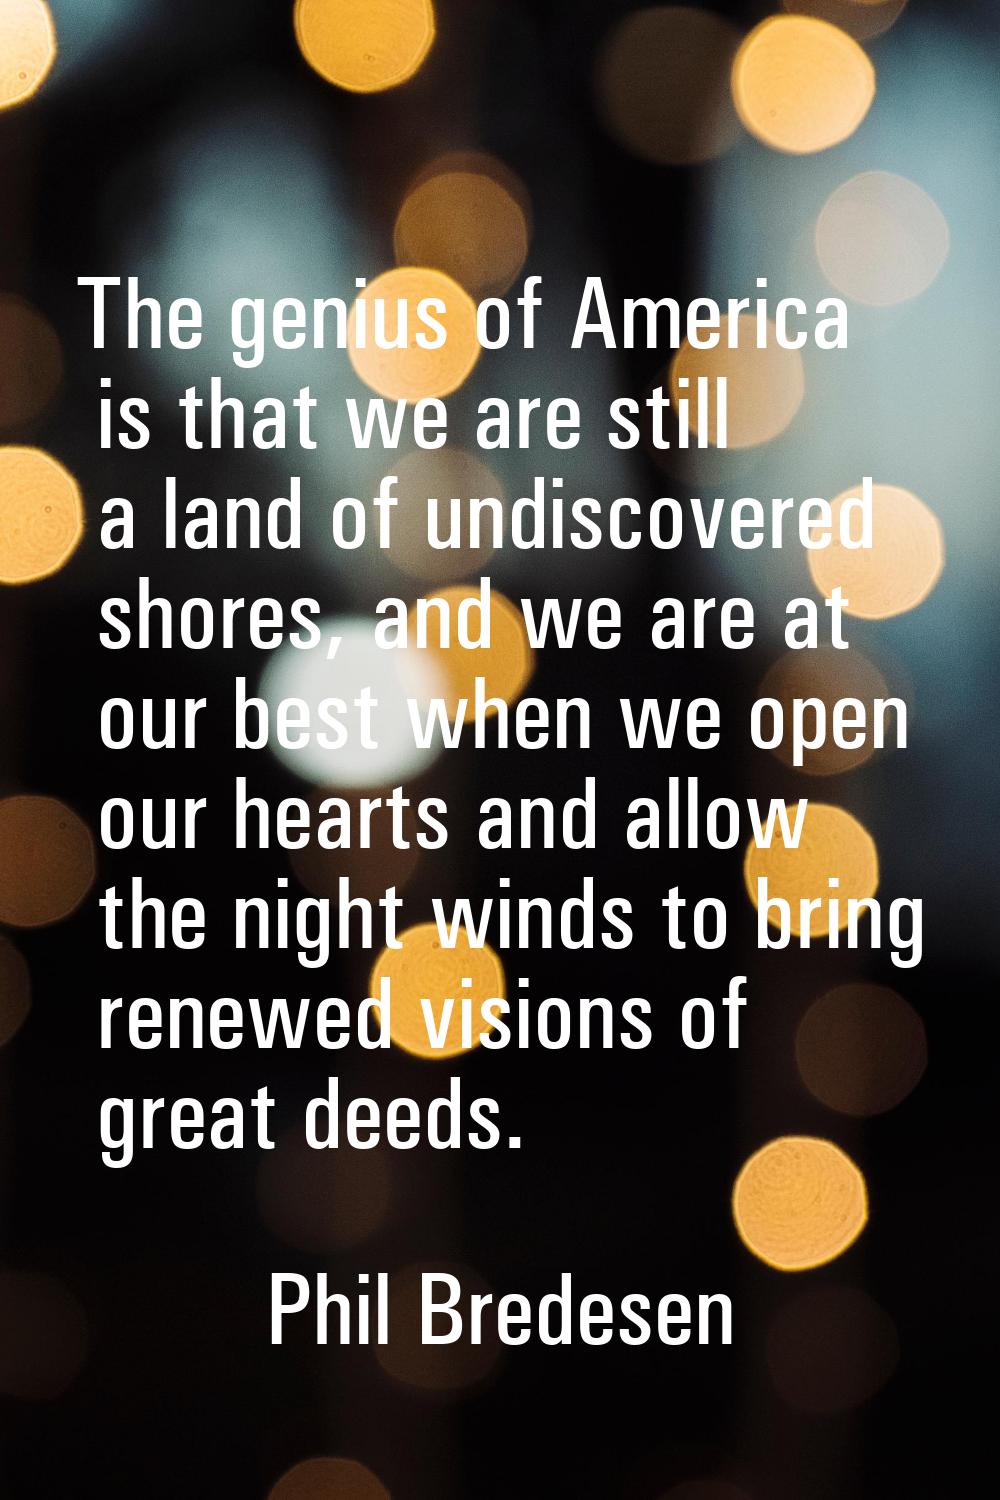 The genius of America is that we are still a land of undiscovered shores, and we are at our best wh